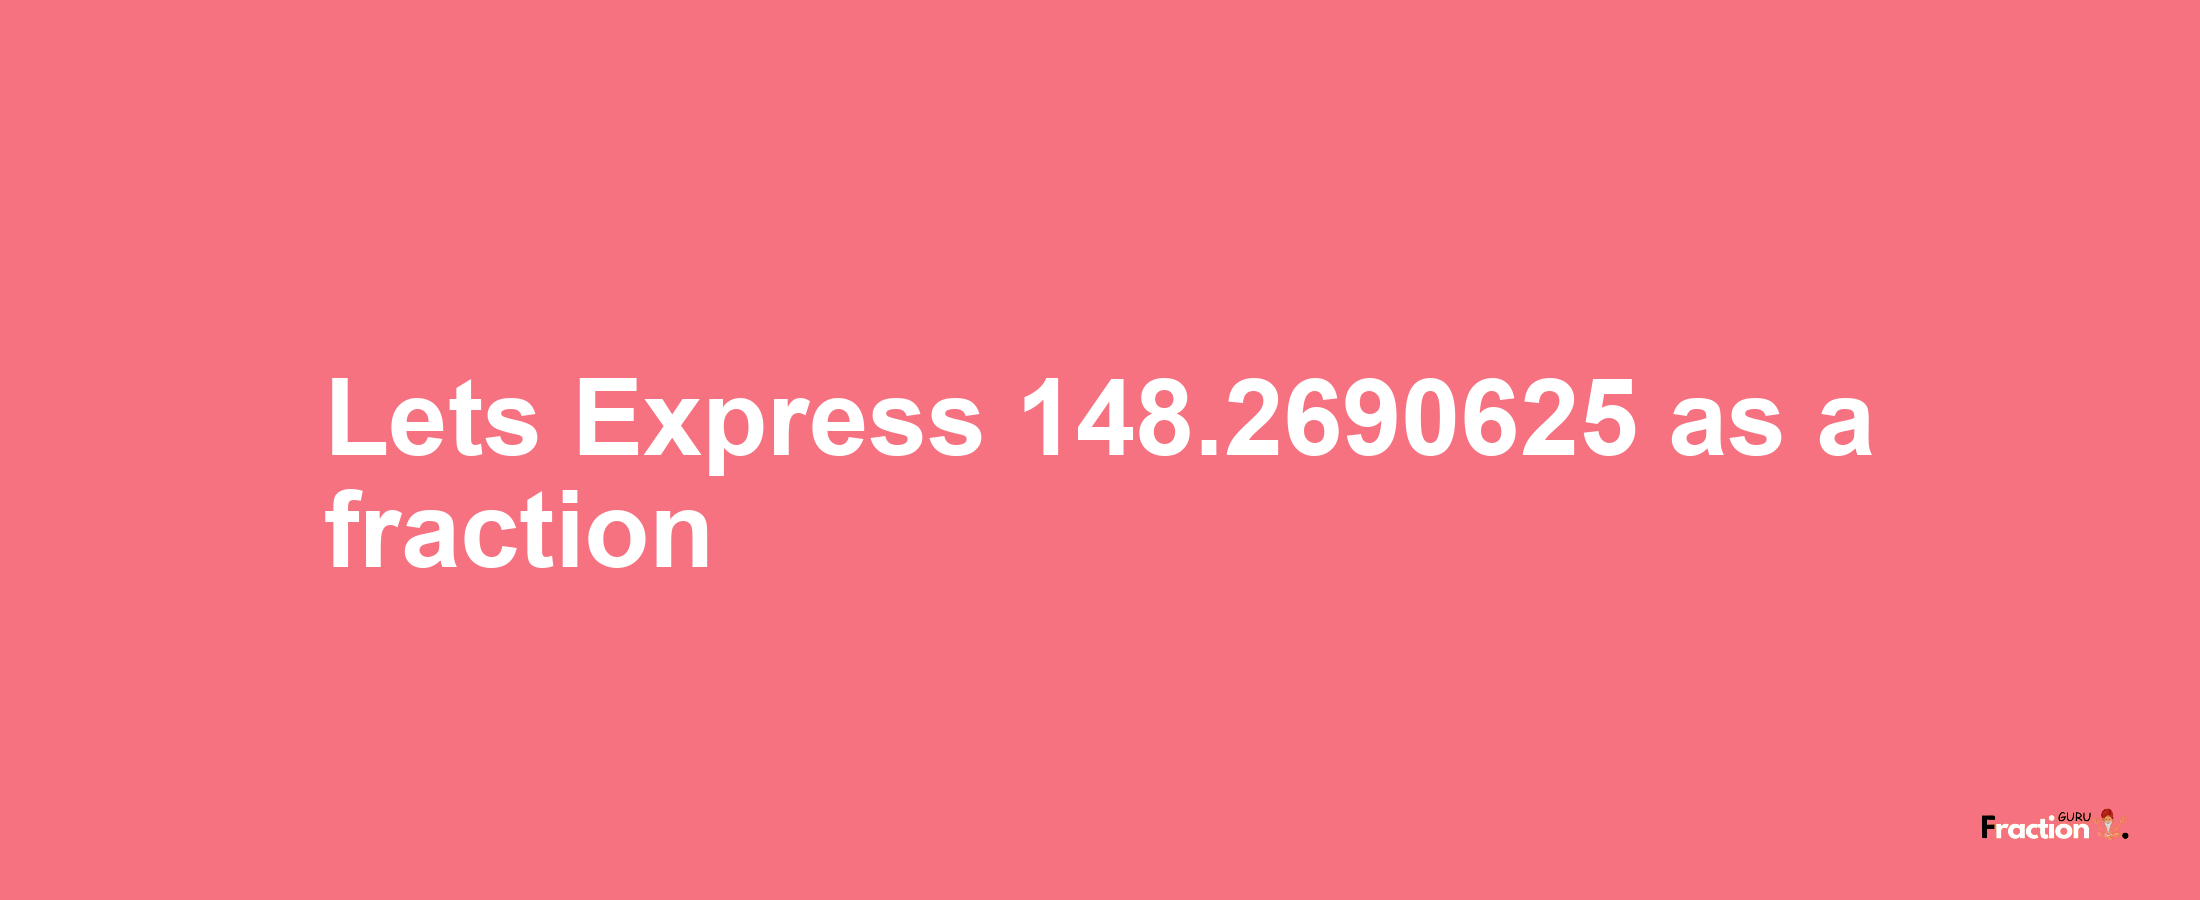 Lets Express 148.2690625 as afraction